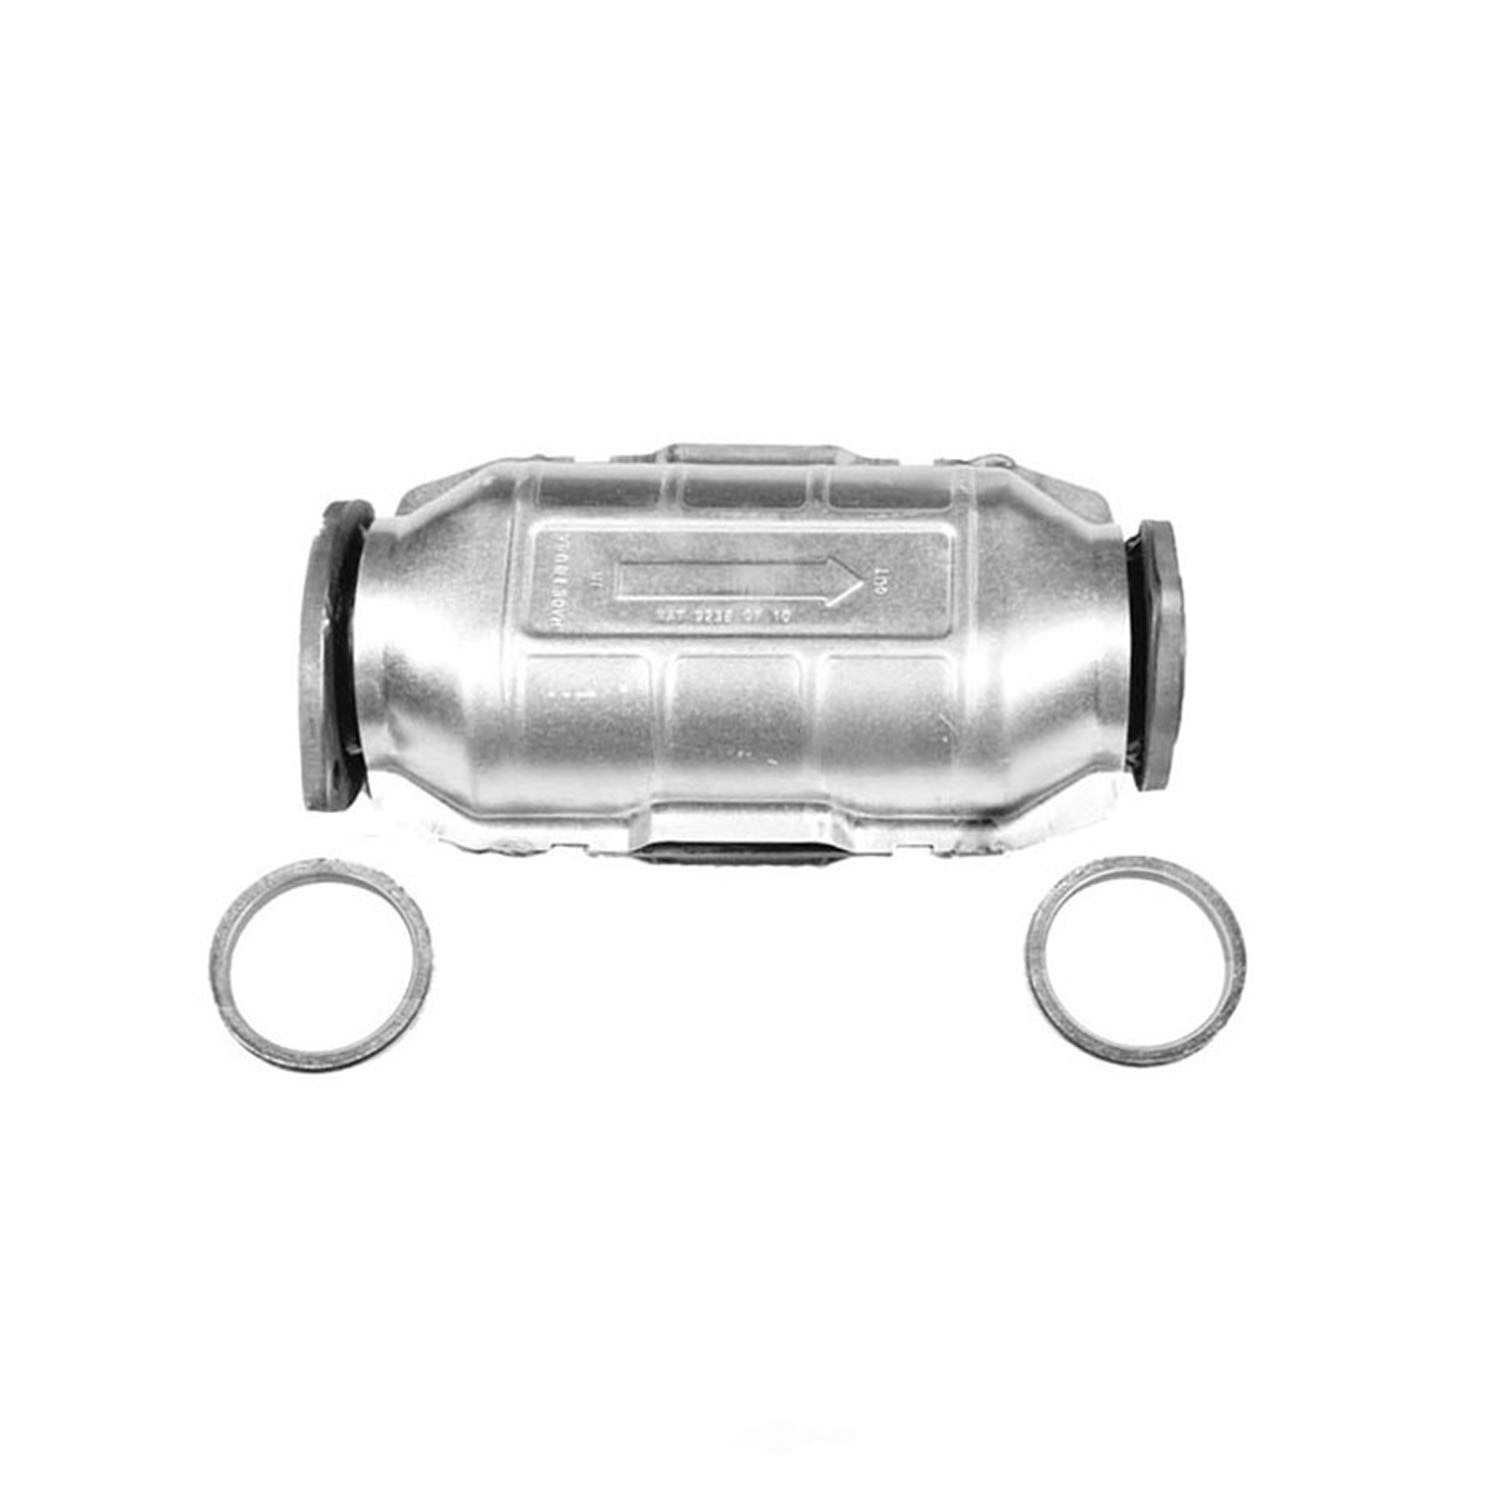 AP EXHAUST FEDERAL CONVERTER - Direct Fit Converter - APG 645469